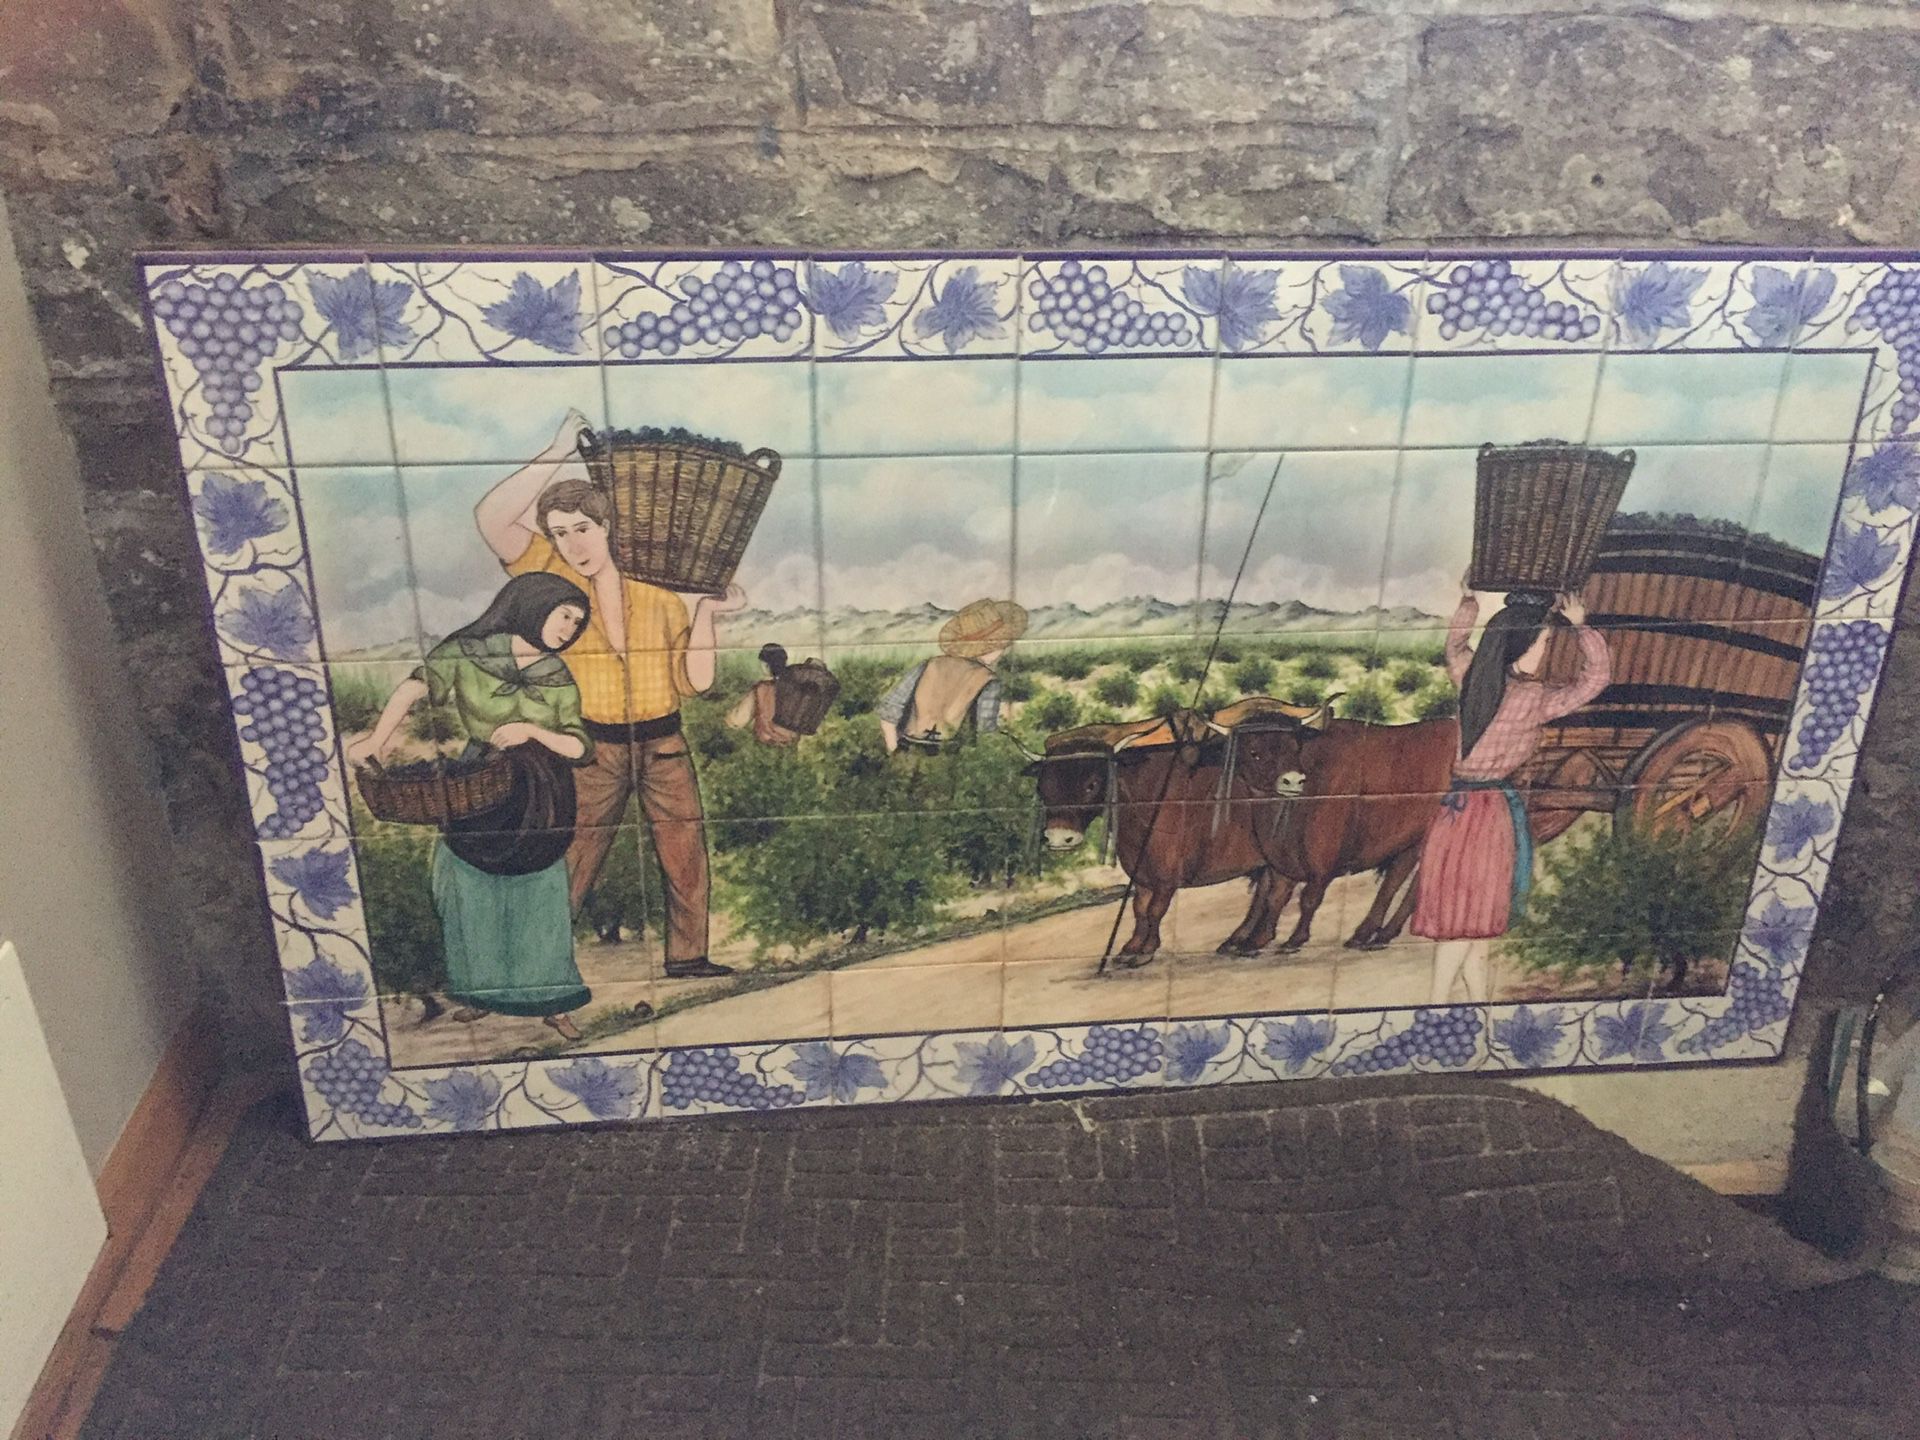 Portuguese tile picture of Vineyard workers.